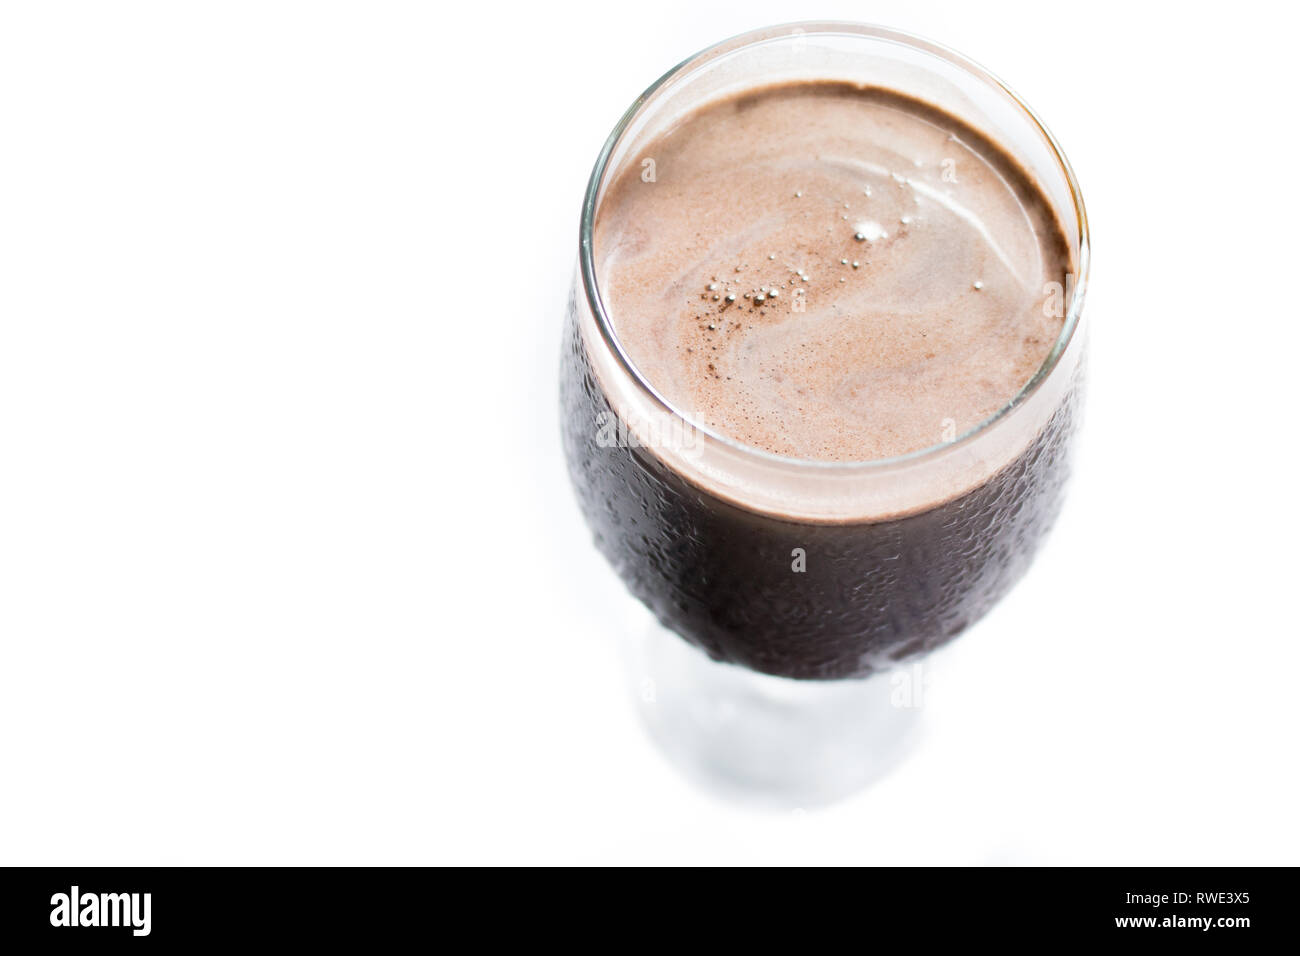 Top view of a sweating glass of chocolate milkshake in a white background. Delicious cold Chocolate drink Stock Photo